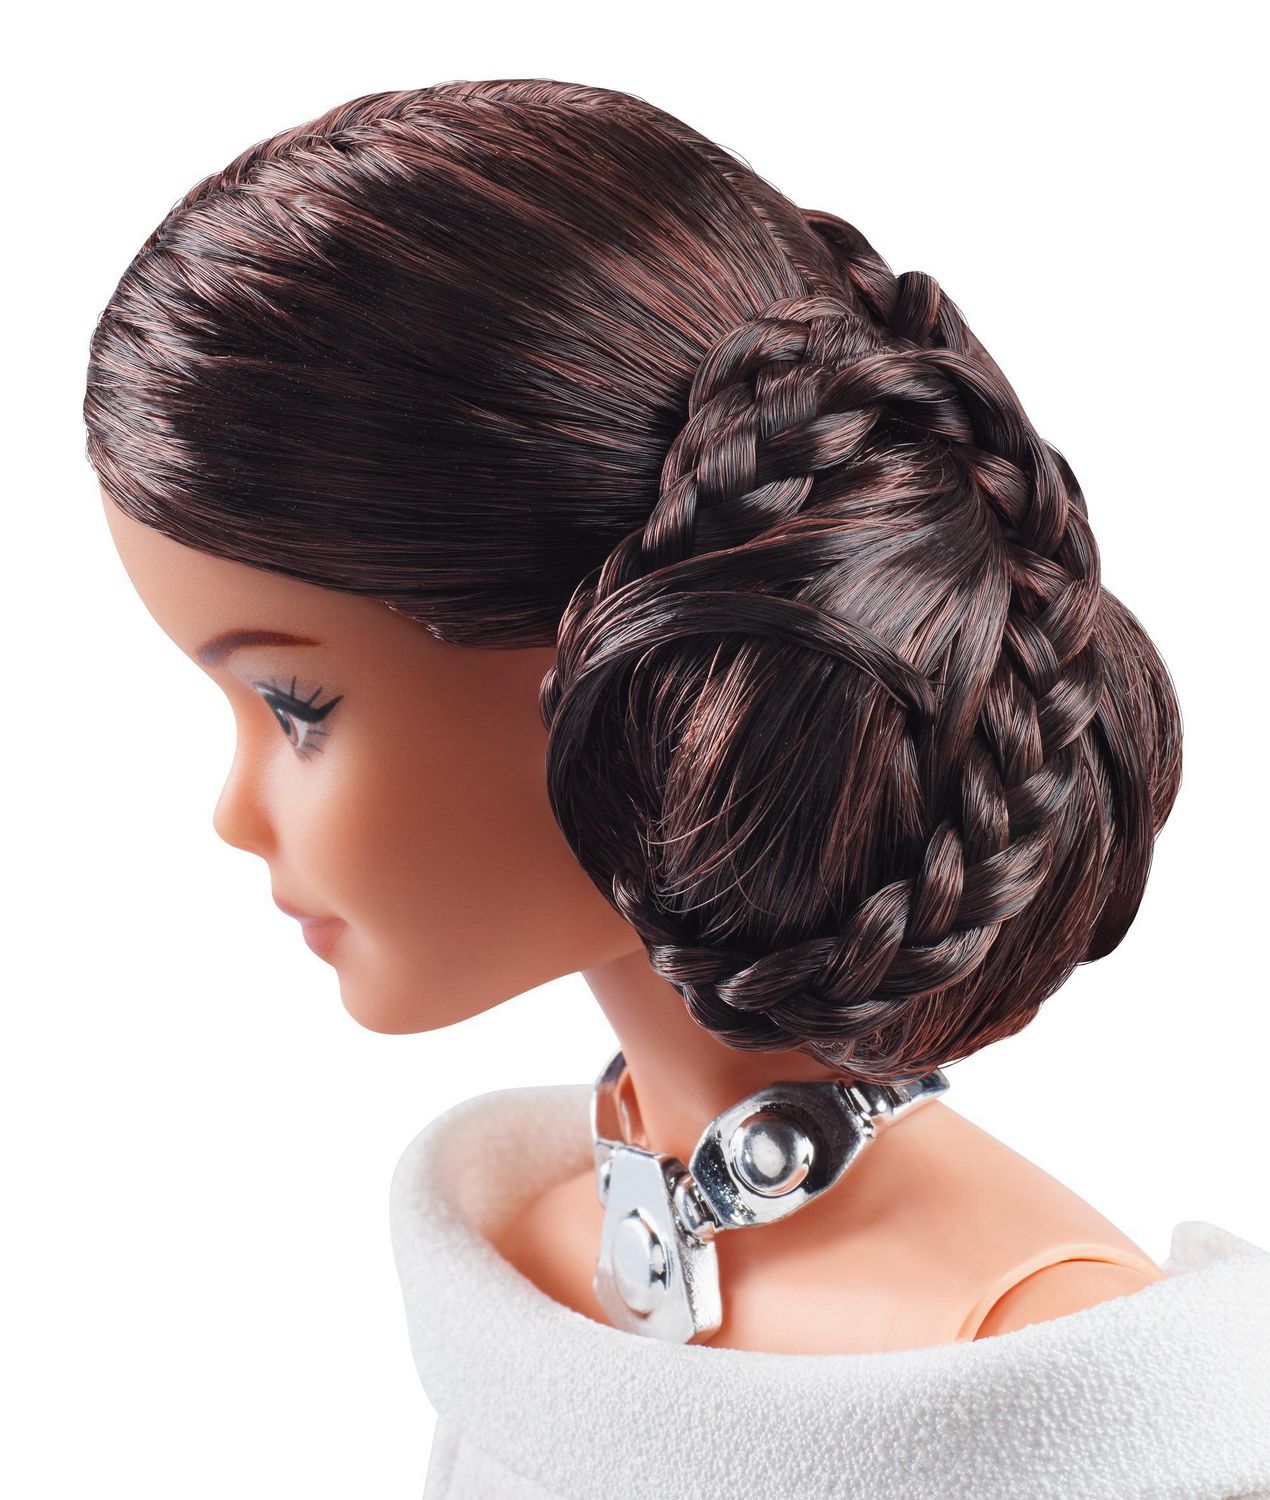 Download Barbie Contemporary 1973 Now Barbie Star Wars Collector Doll Model Muse Princess Leia Millie Braided Buns Dolls Bears